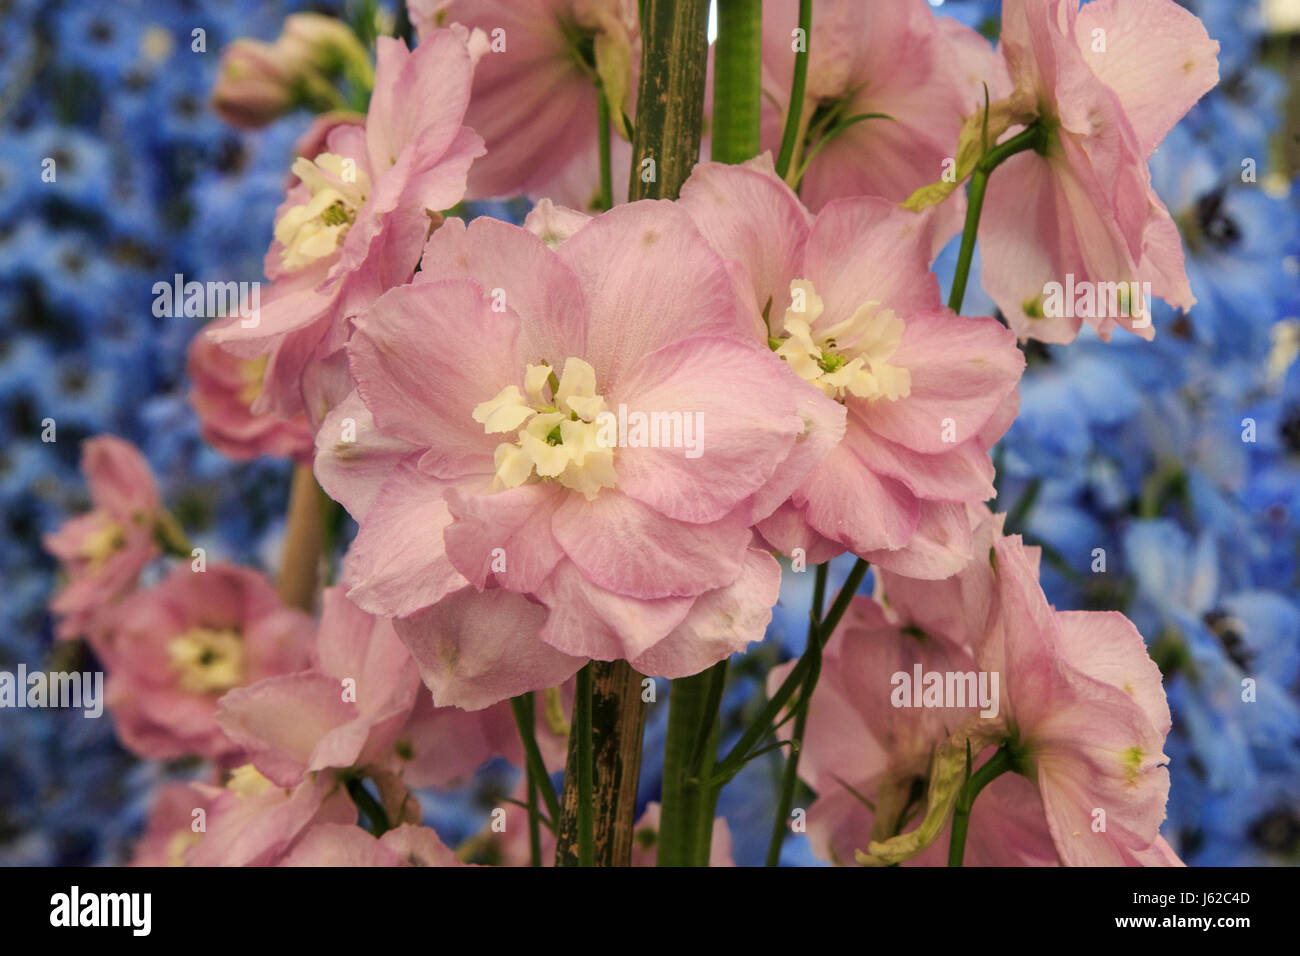 London, UK. 19 May 2017. Delphiniums (Delphinium staphisagria).  Preparations are well under way at the 2017 RHS Chelsea Flower Show which opens to the public on Tuesday. Photo: Vibrant Pictures/Alamy Live News Stock Photo